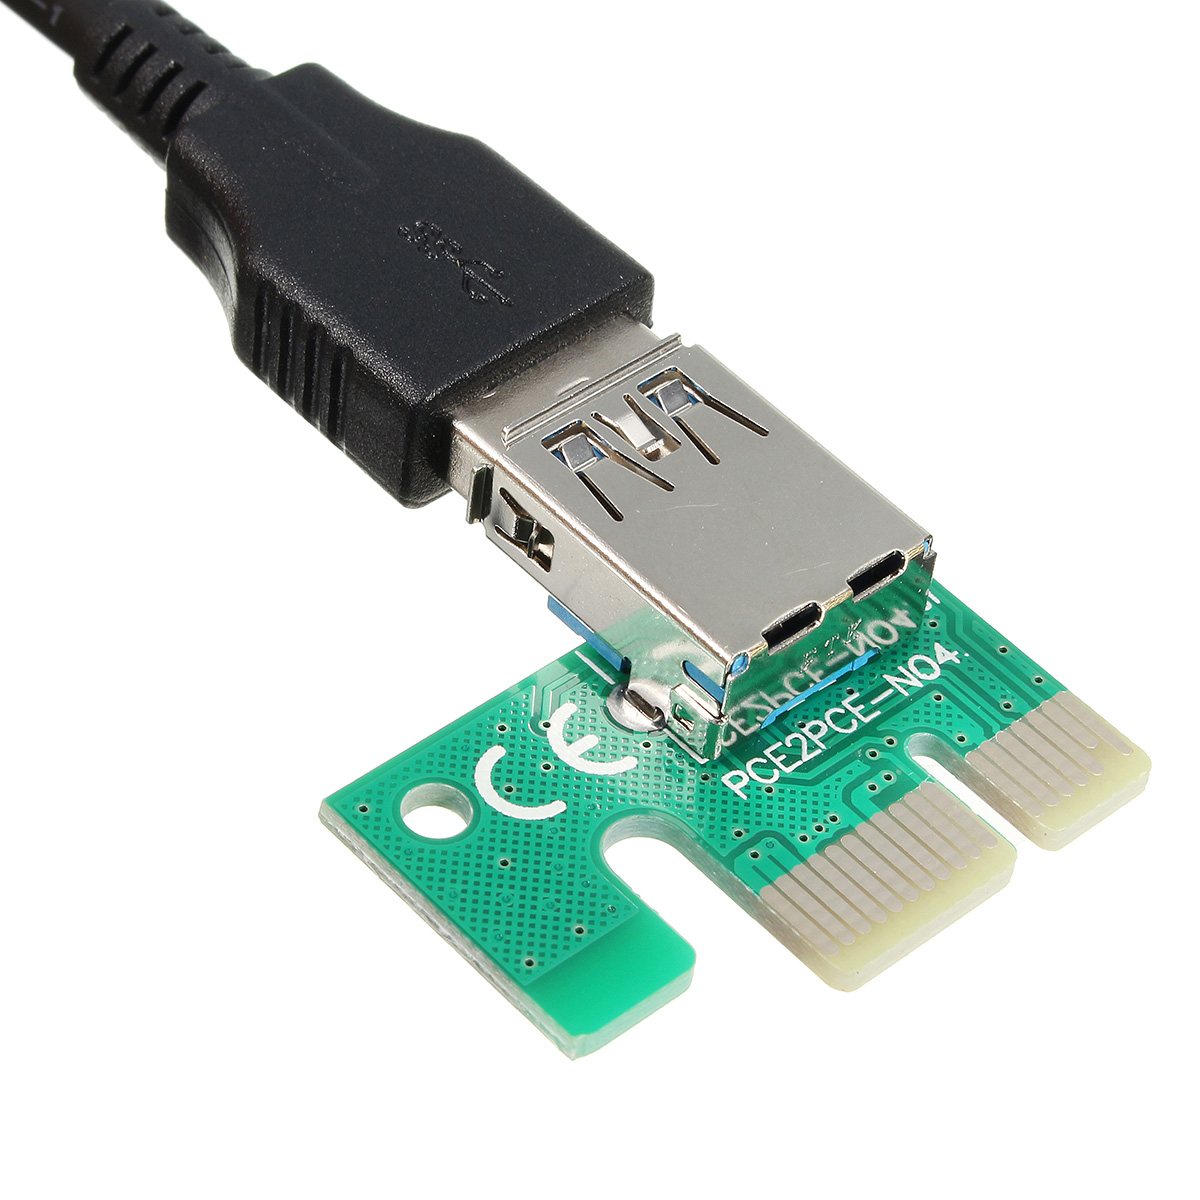 Find USB 3 0 PCI E Express 1x to16x Extension Cable Extender Riser Card Adapter SATA Cable for Sale on Gipsybee.com with cryptocurrencies